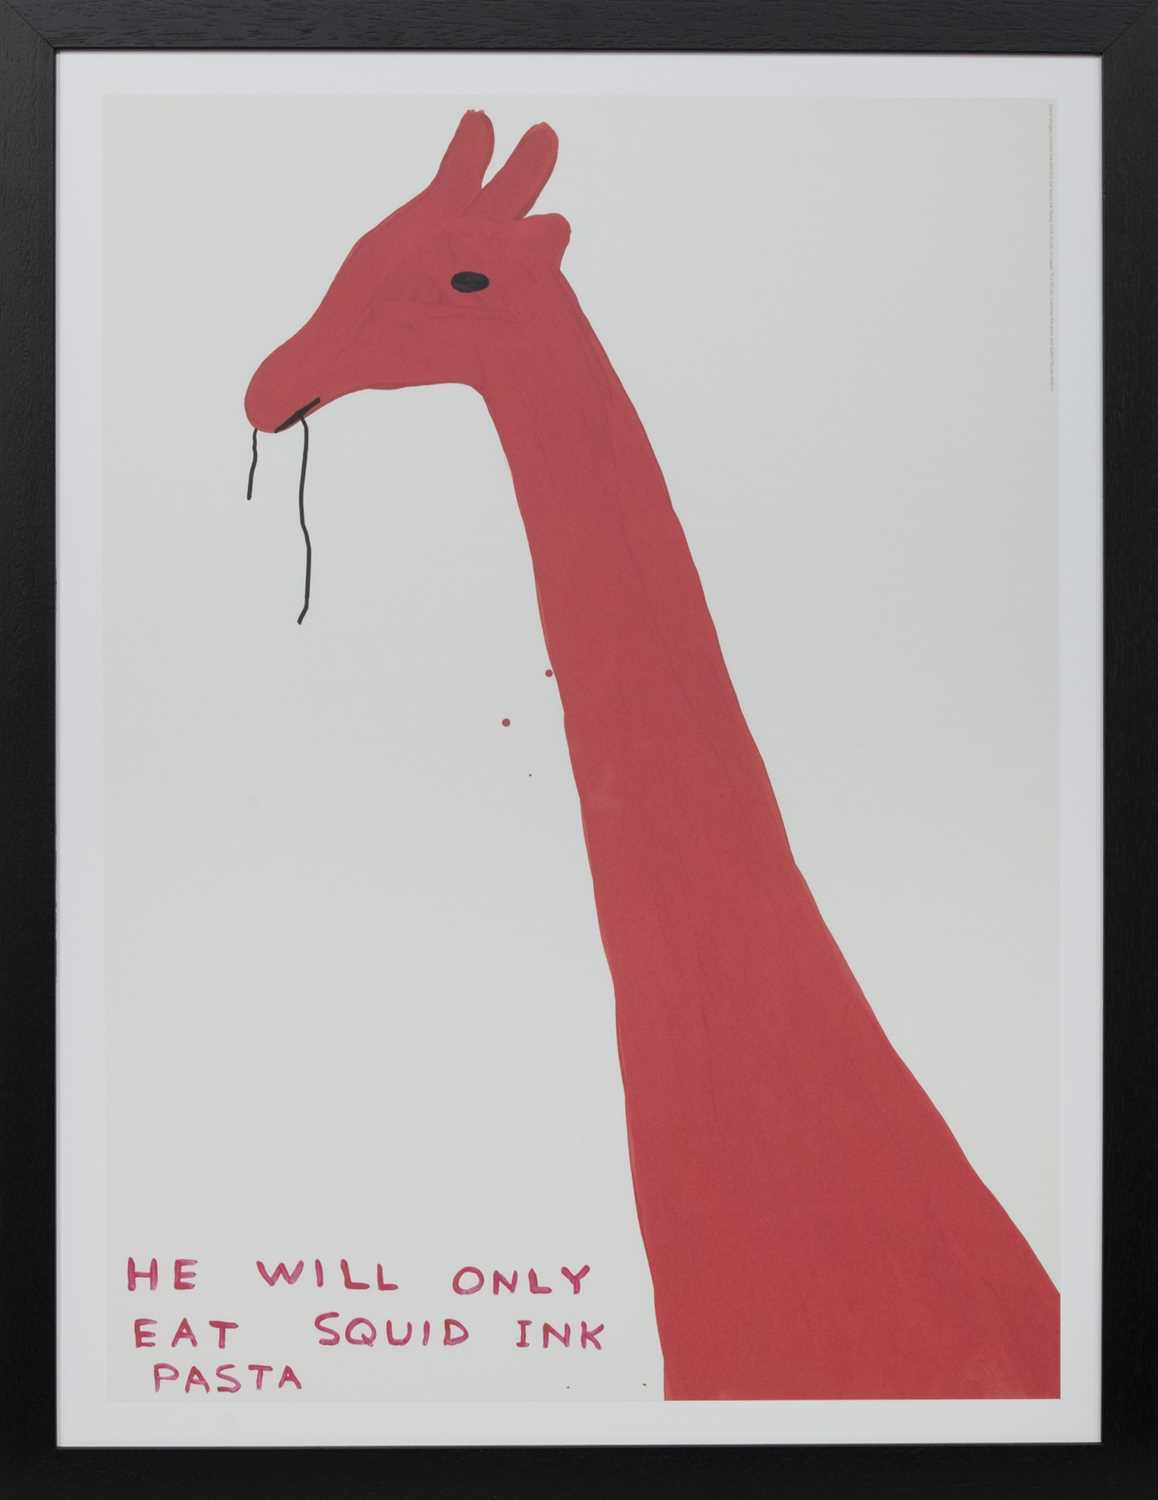 Lot 62 - HE WILL ONLY EAT SQUID INK PASTA, A LITHOGRAPH BY DAVID SHRIGLEY